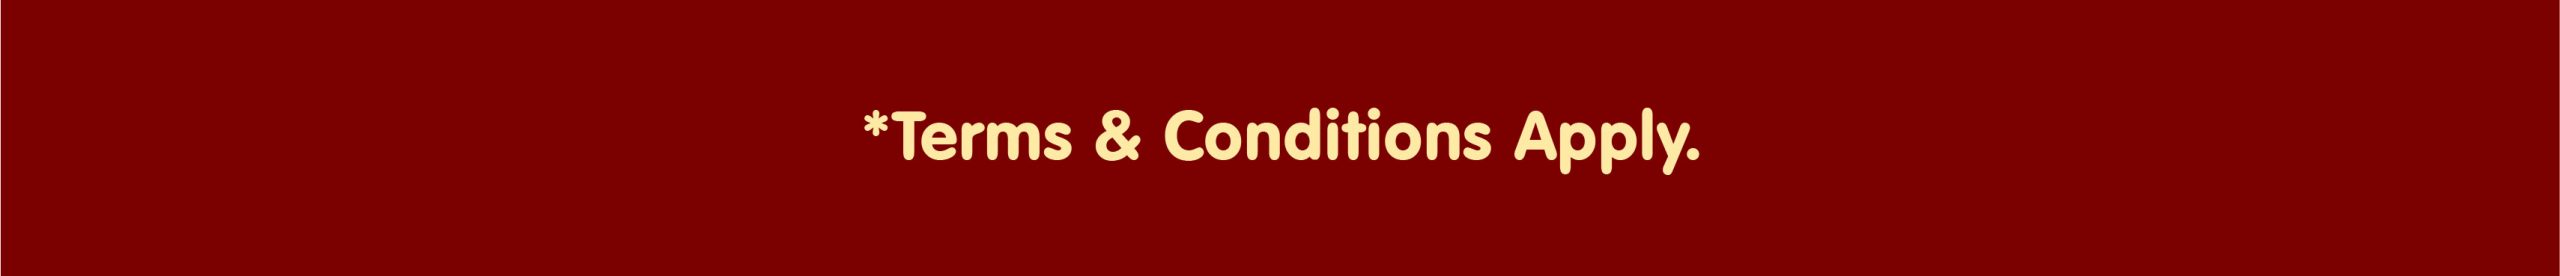 ProBalance Terms and Conditions